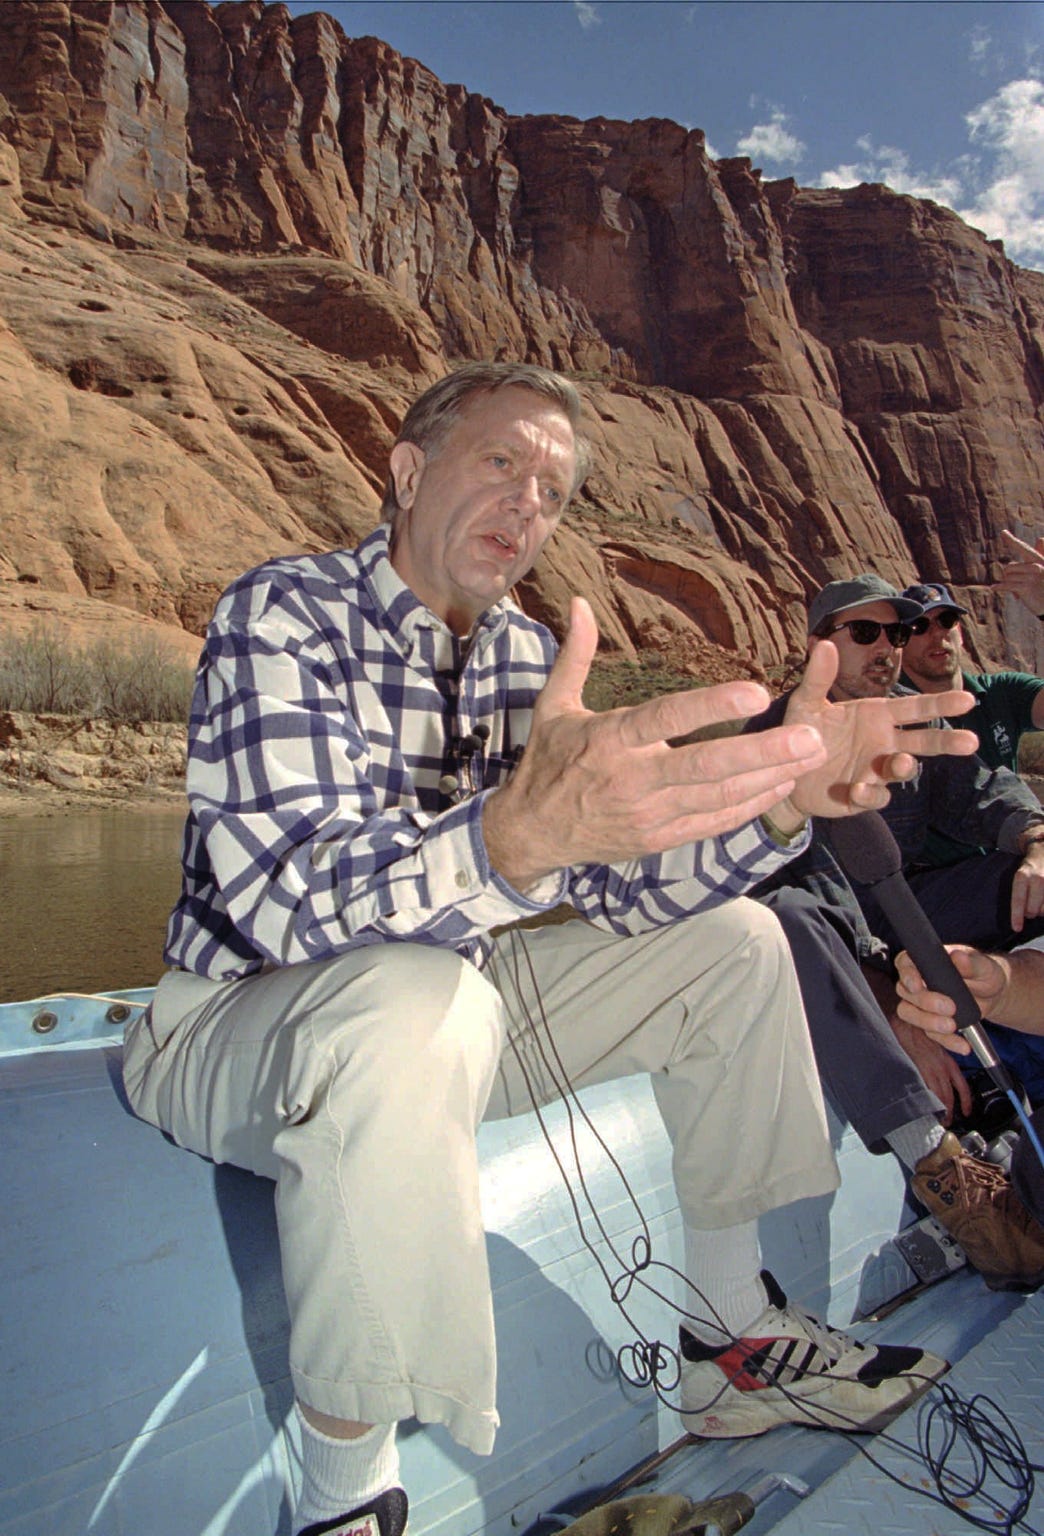 Bruce Babbitt, then the U.S. Interior Secretary, talks about the Colorado River and the Grand Canyon as he takes a raft trip down the river from Page on March 25, 1996. He opened the gates at Glen Canyon Dam to start the first controlled flood of the Colorado River.